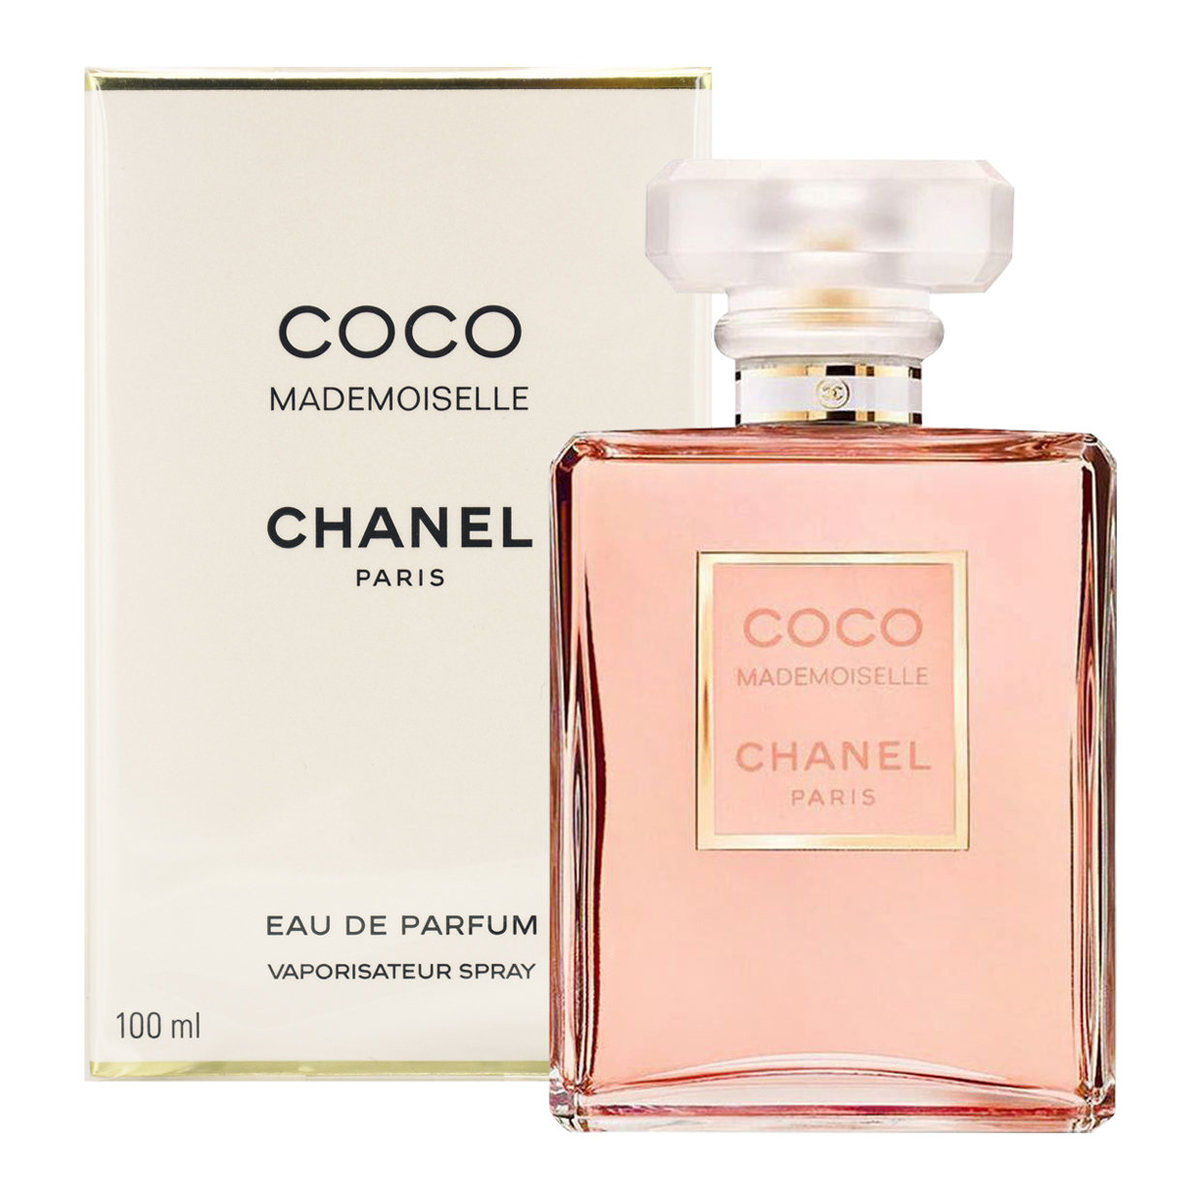 Coco Mademoiselle CHANEL Gift set for women